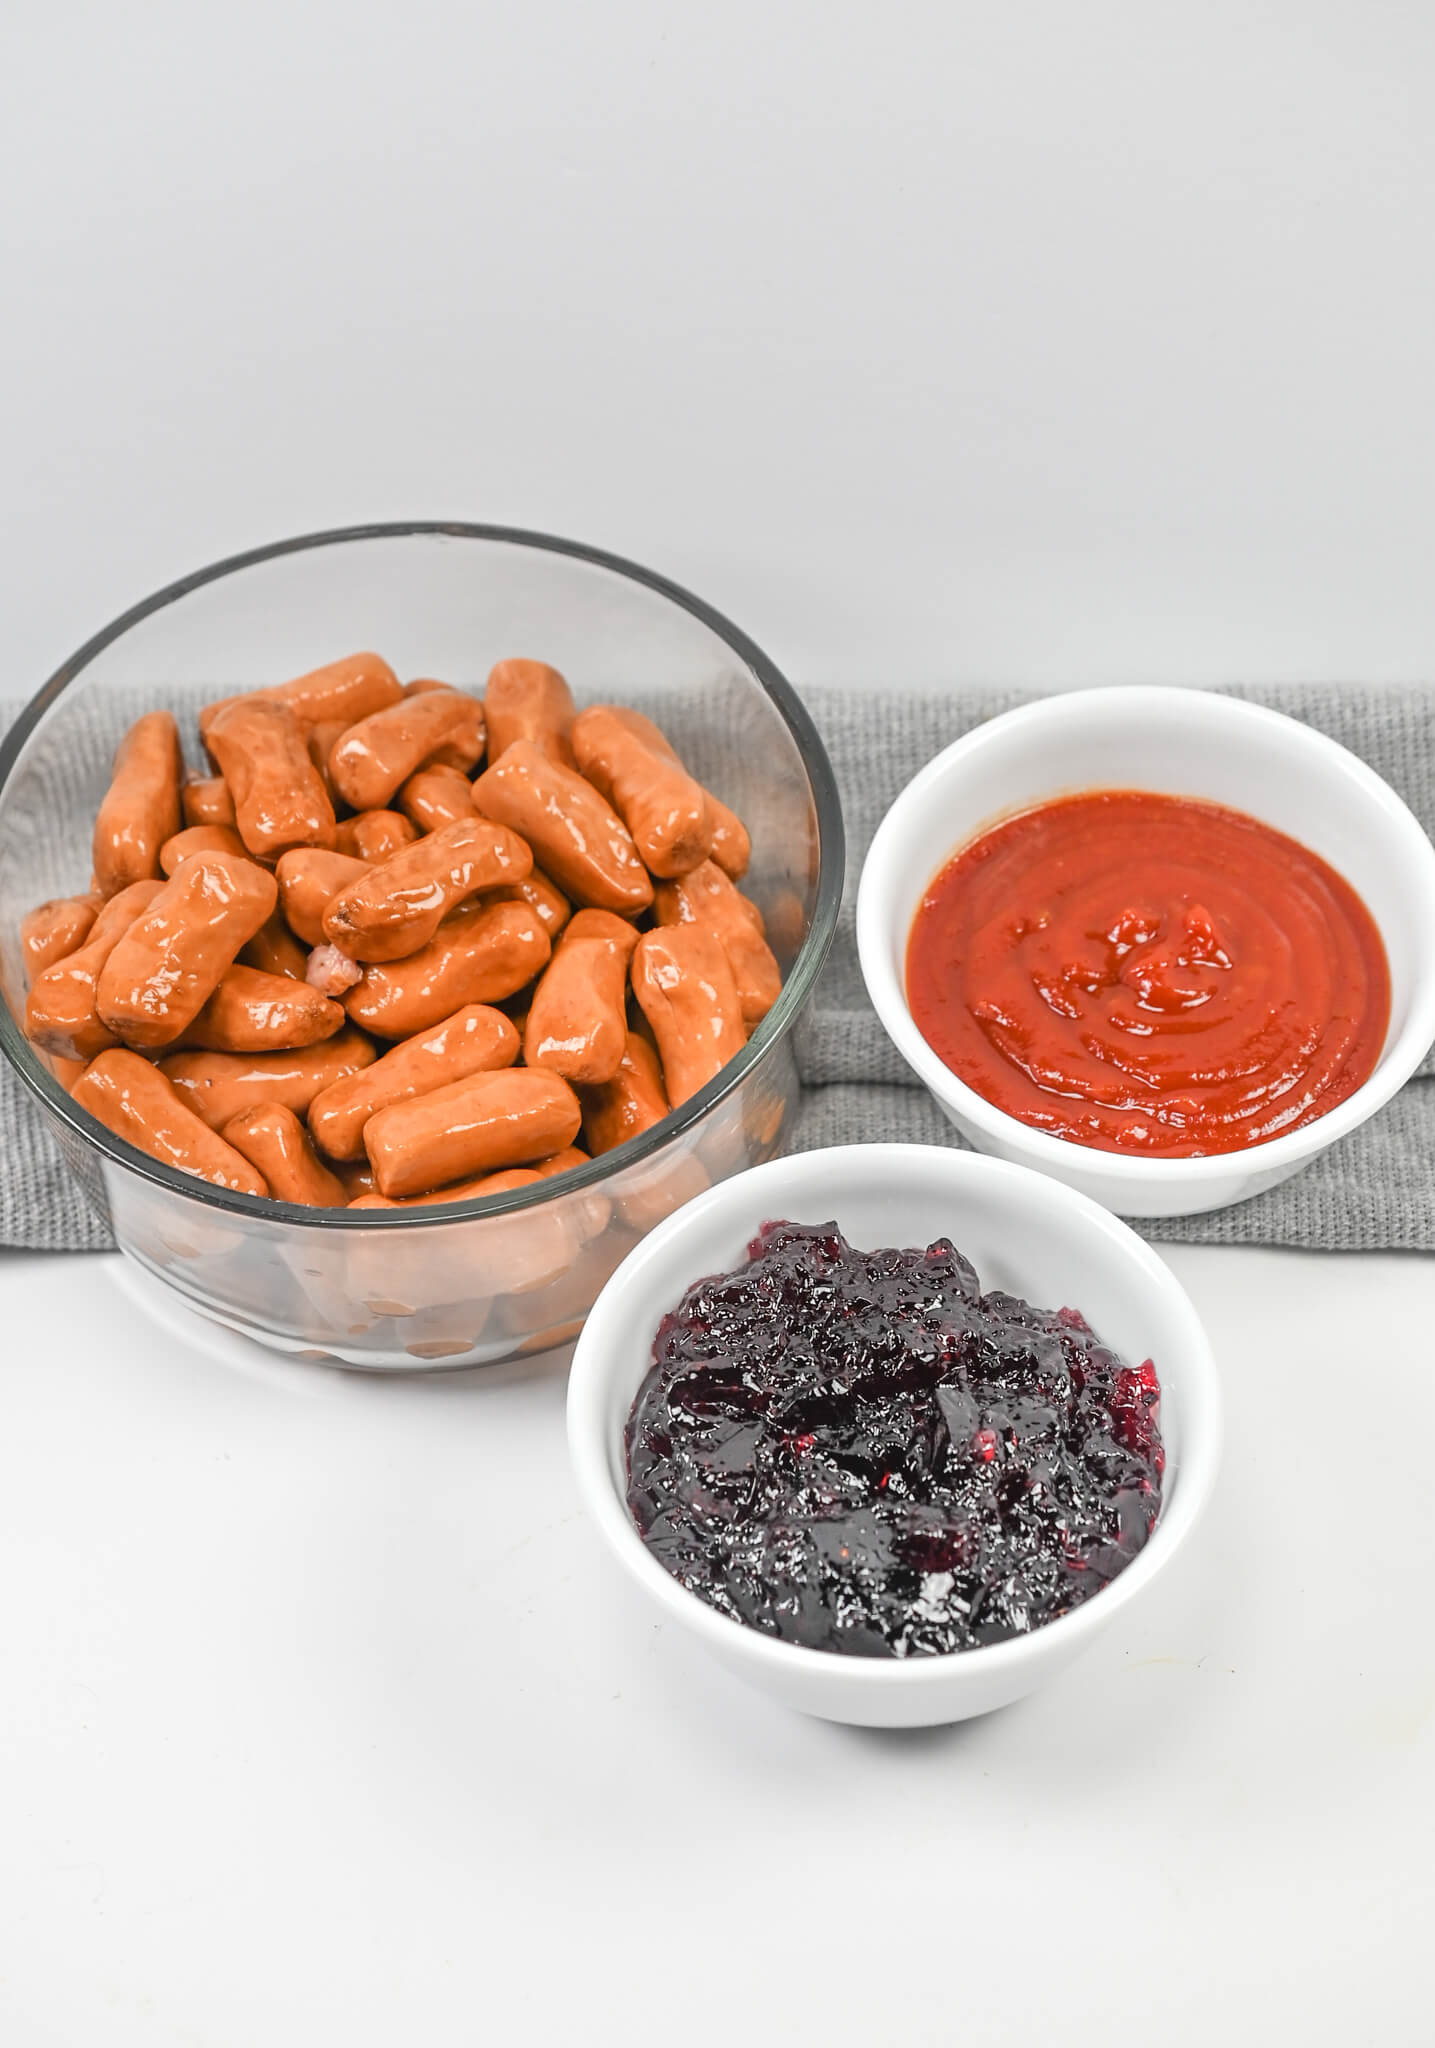 A bowl of ketchup, a bowl of sauce, and a bowl of hot dogs and jelly.